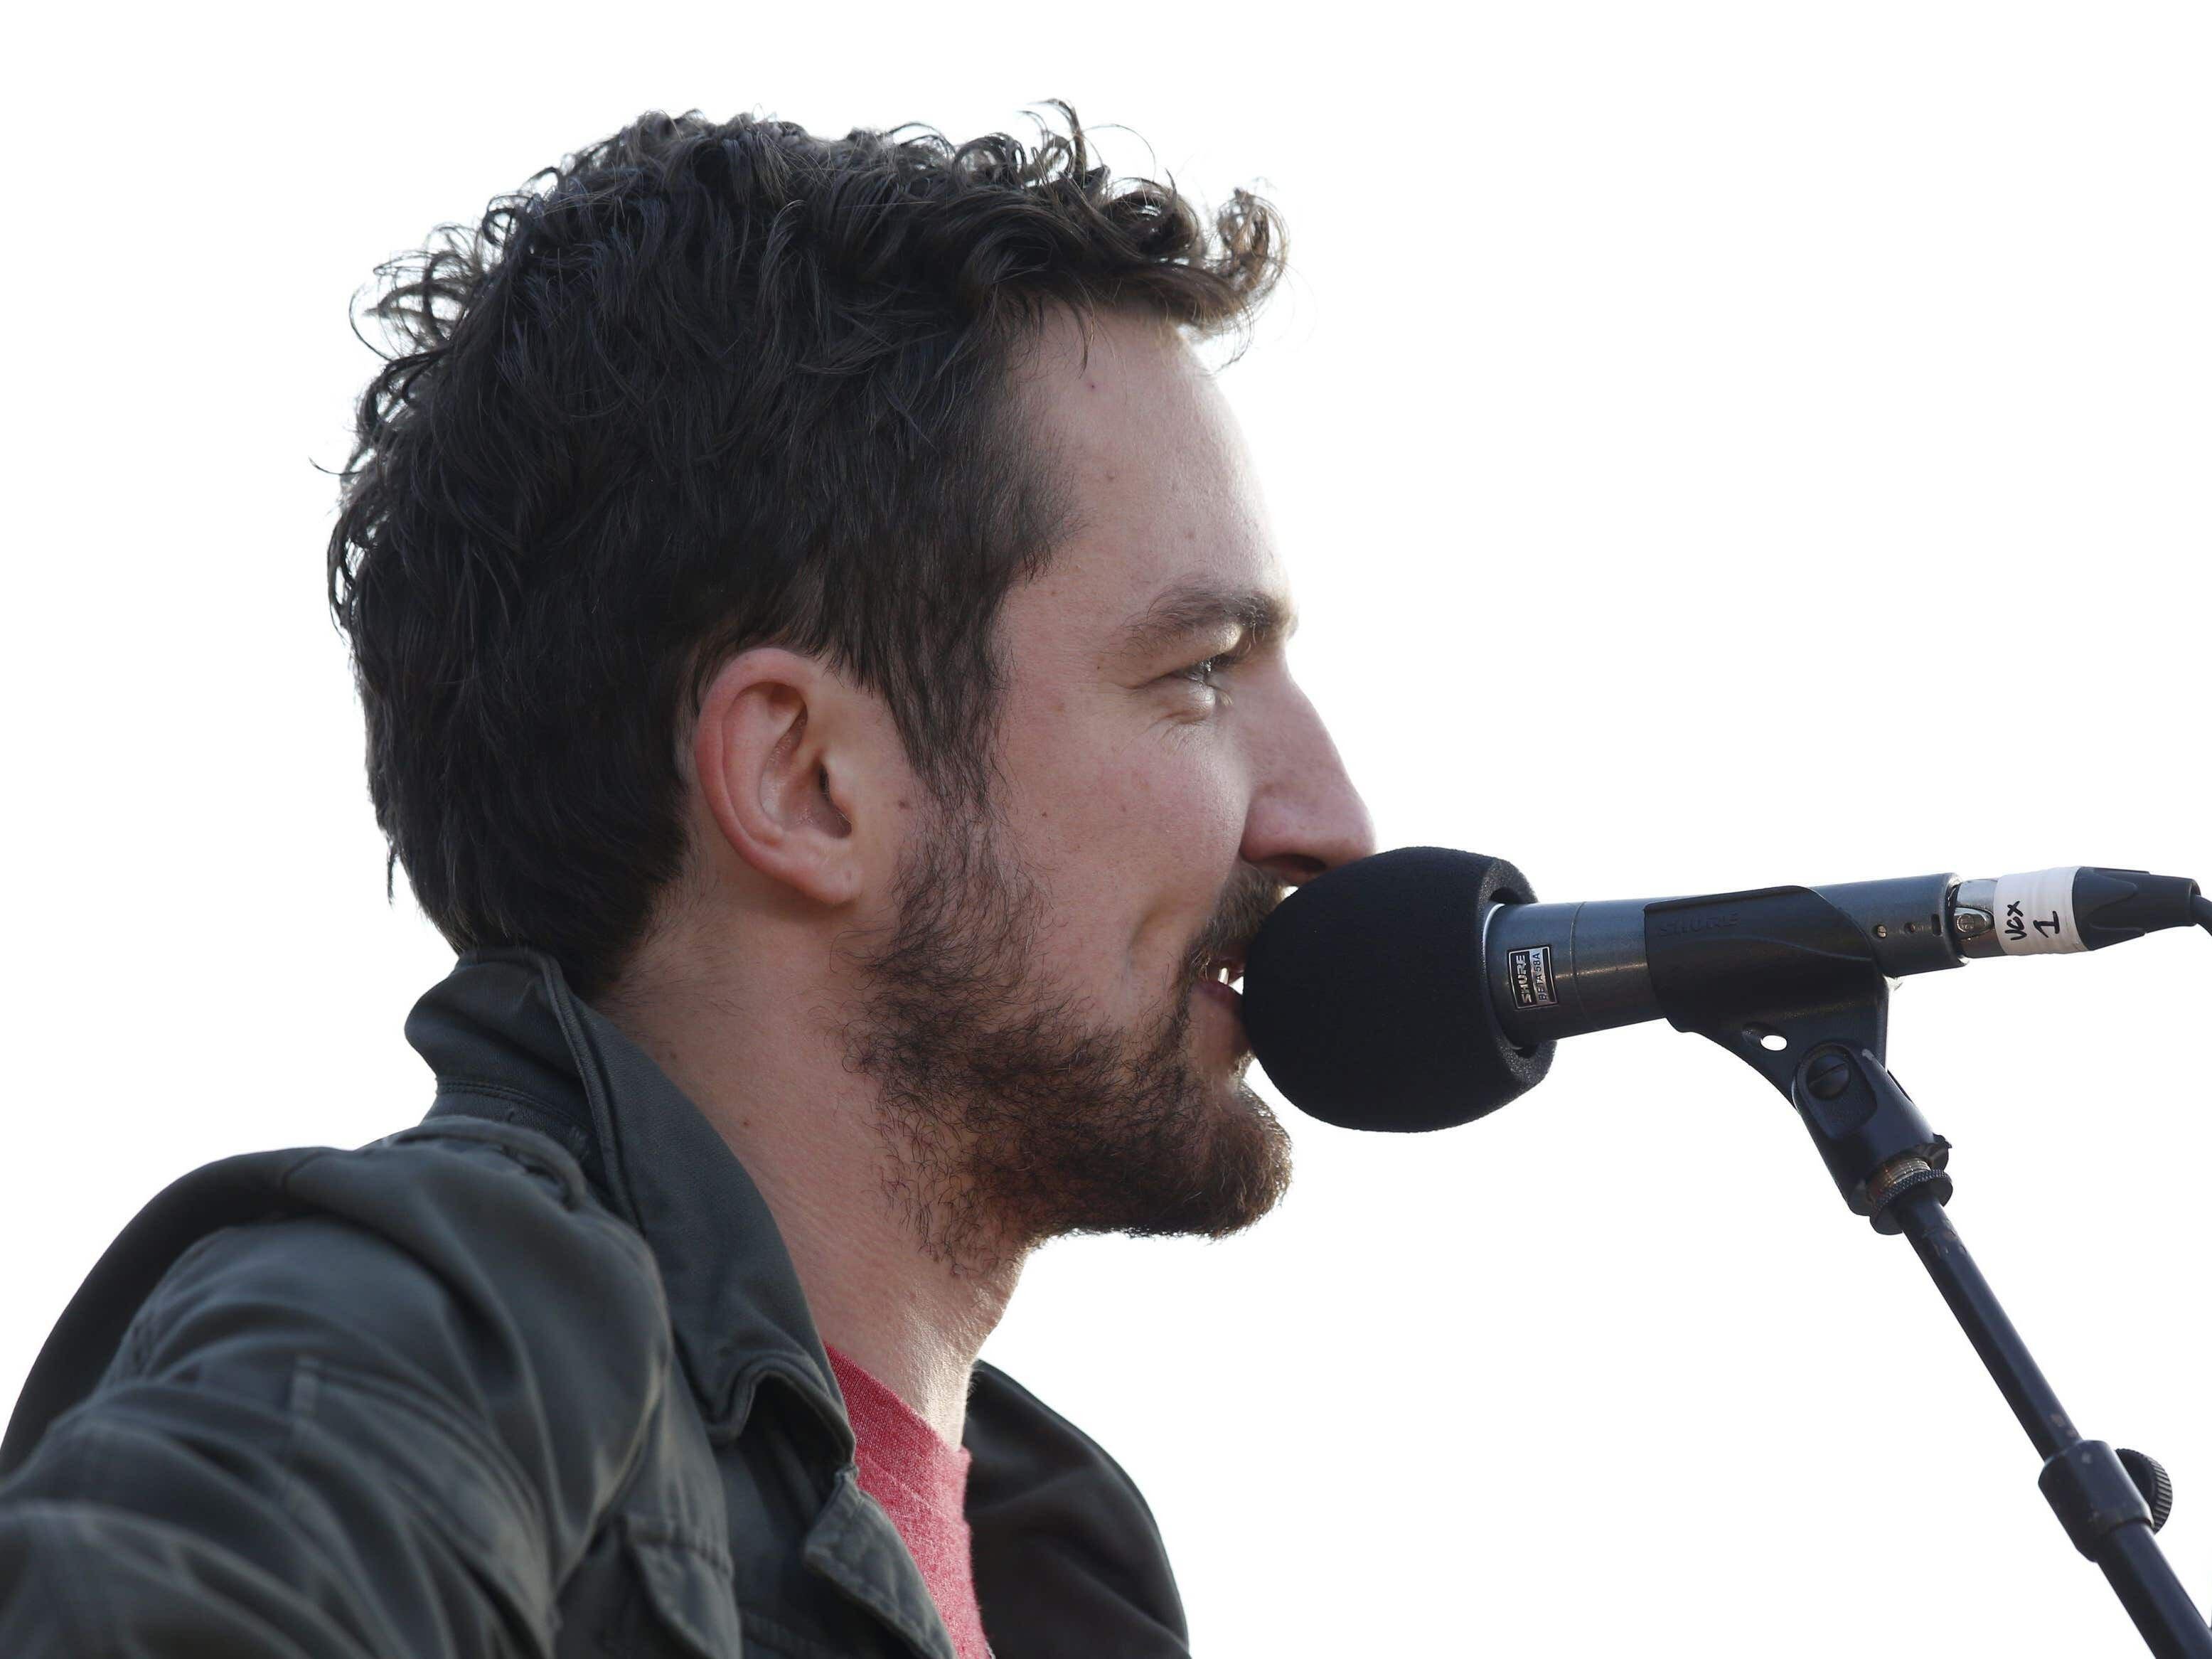 Frank Turner reflects on 25 years touring: Everyone told me I couldn’t do this